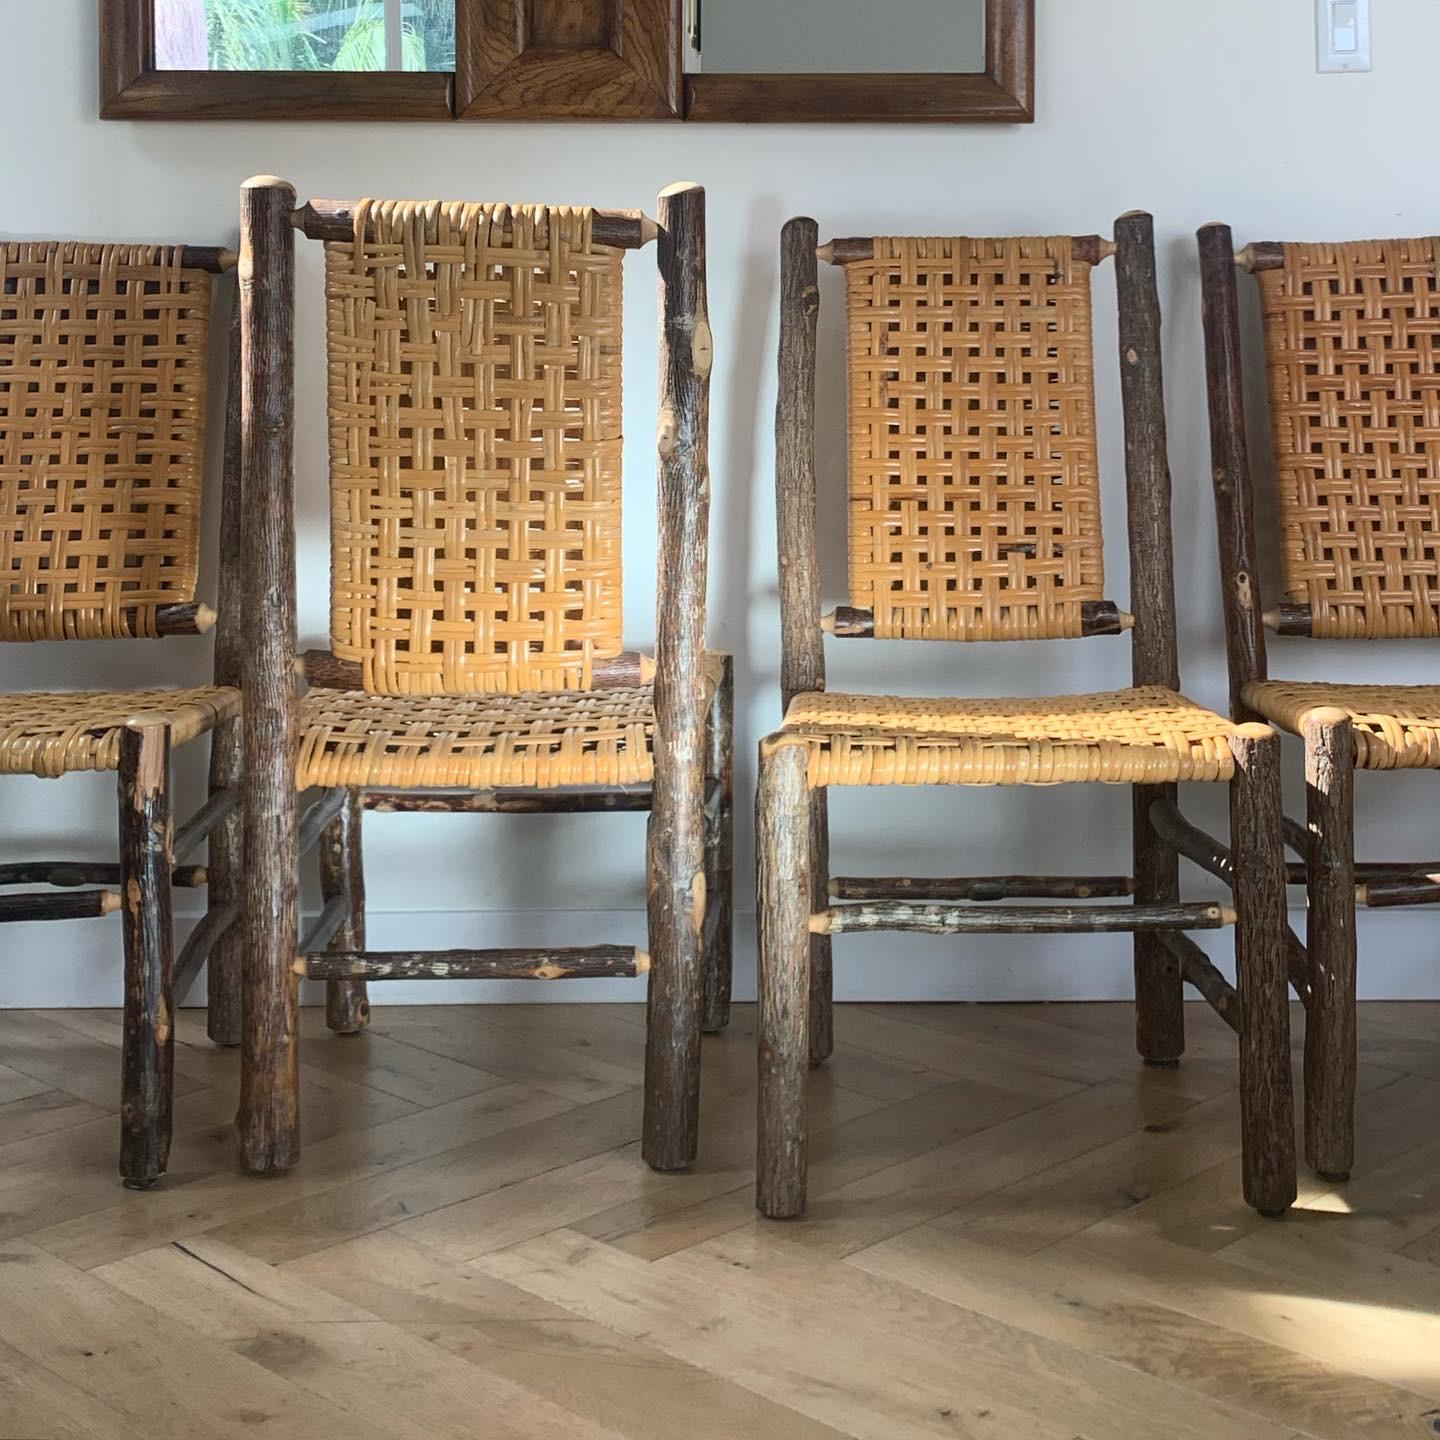 Set of 4 rustic prewar Old Hickory chairs, signed, with caning, circa 1940s. Great condition with minor signs of age, which includes a bit of unraveling. 

Measures: 19.25” W x 20.25” D x 39” H 
Seat: 18.75” W x 19.25” D x 18” H.